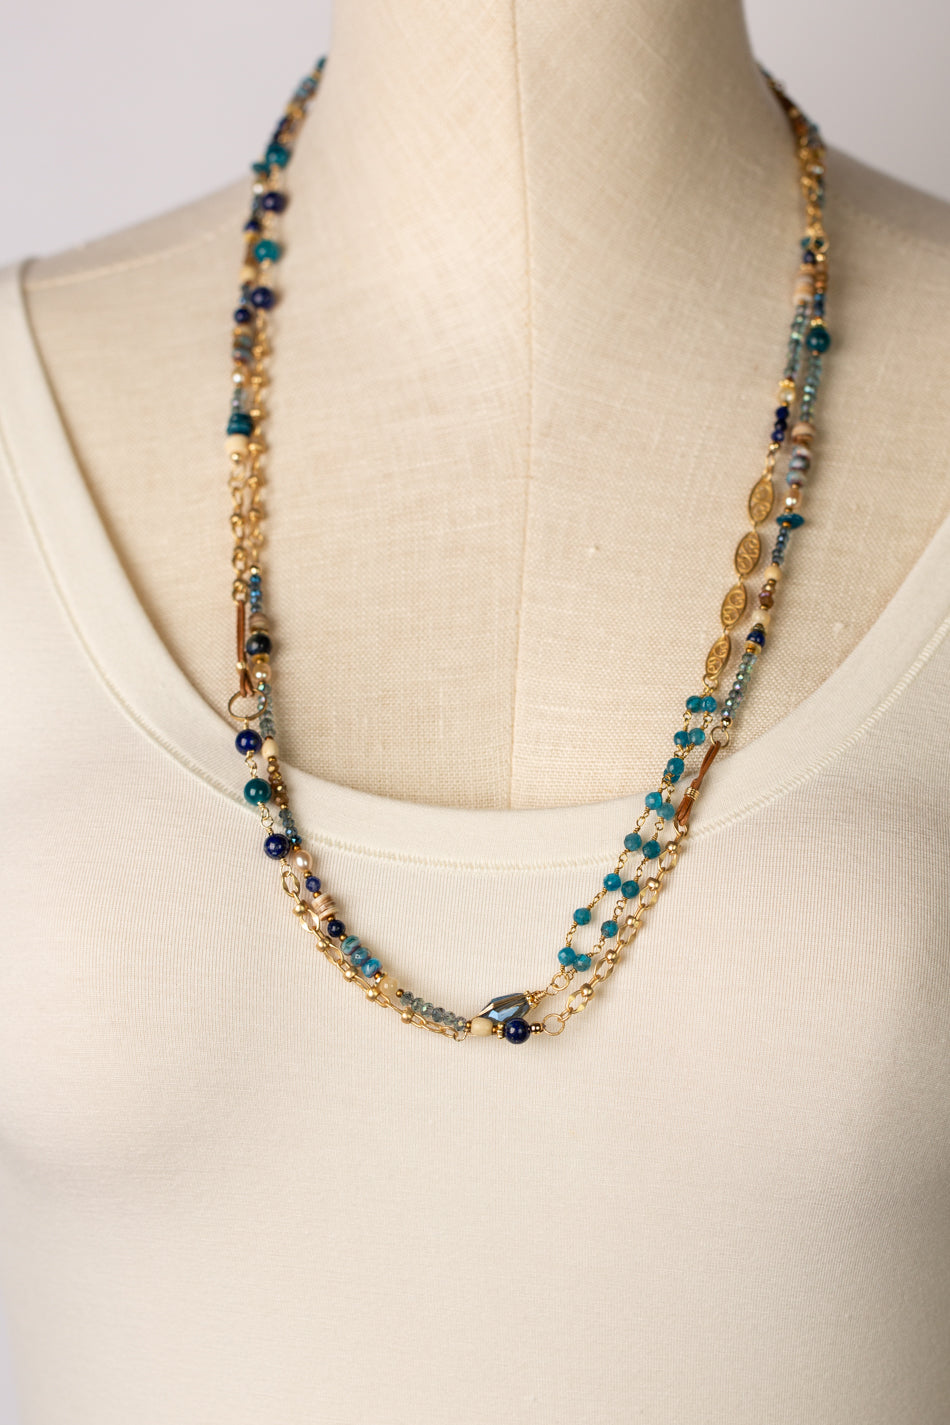 Starry Night 57.5-59.5" Apatite, Crystal Collage Necklace